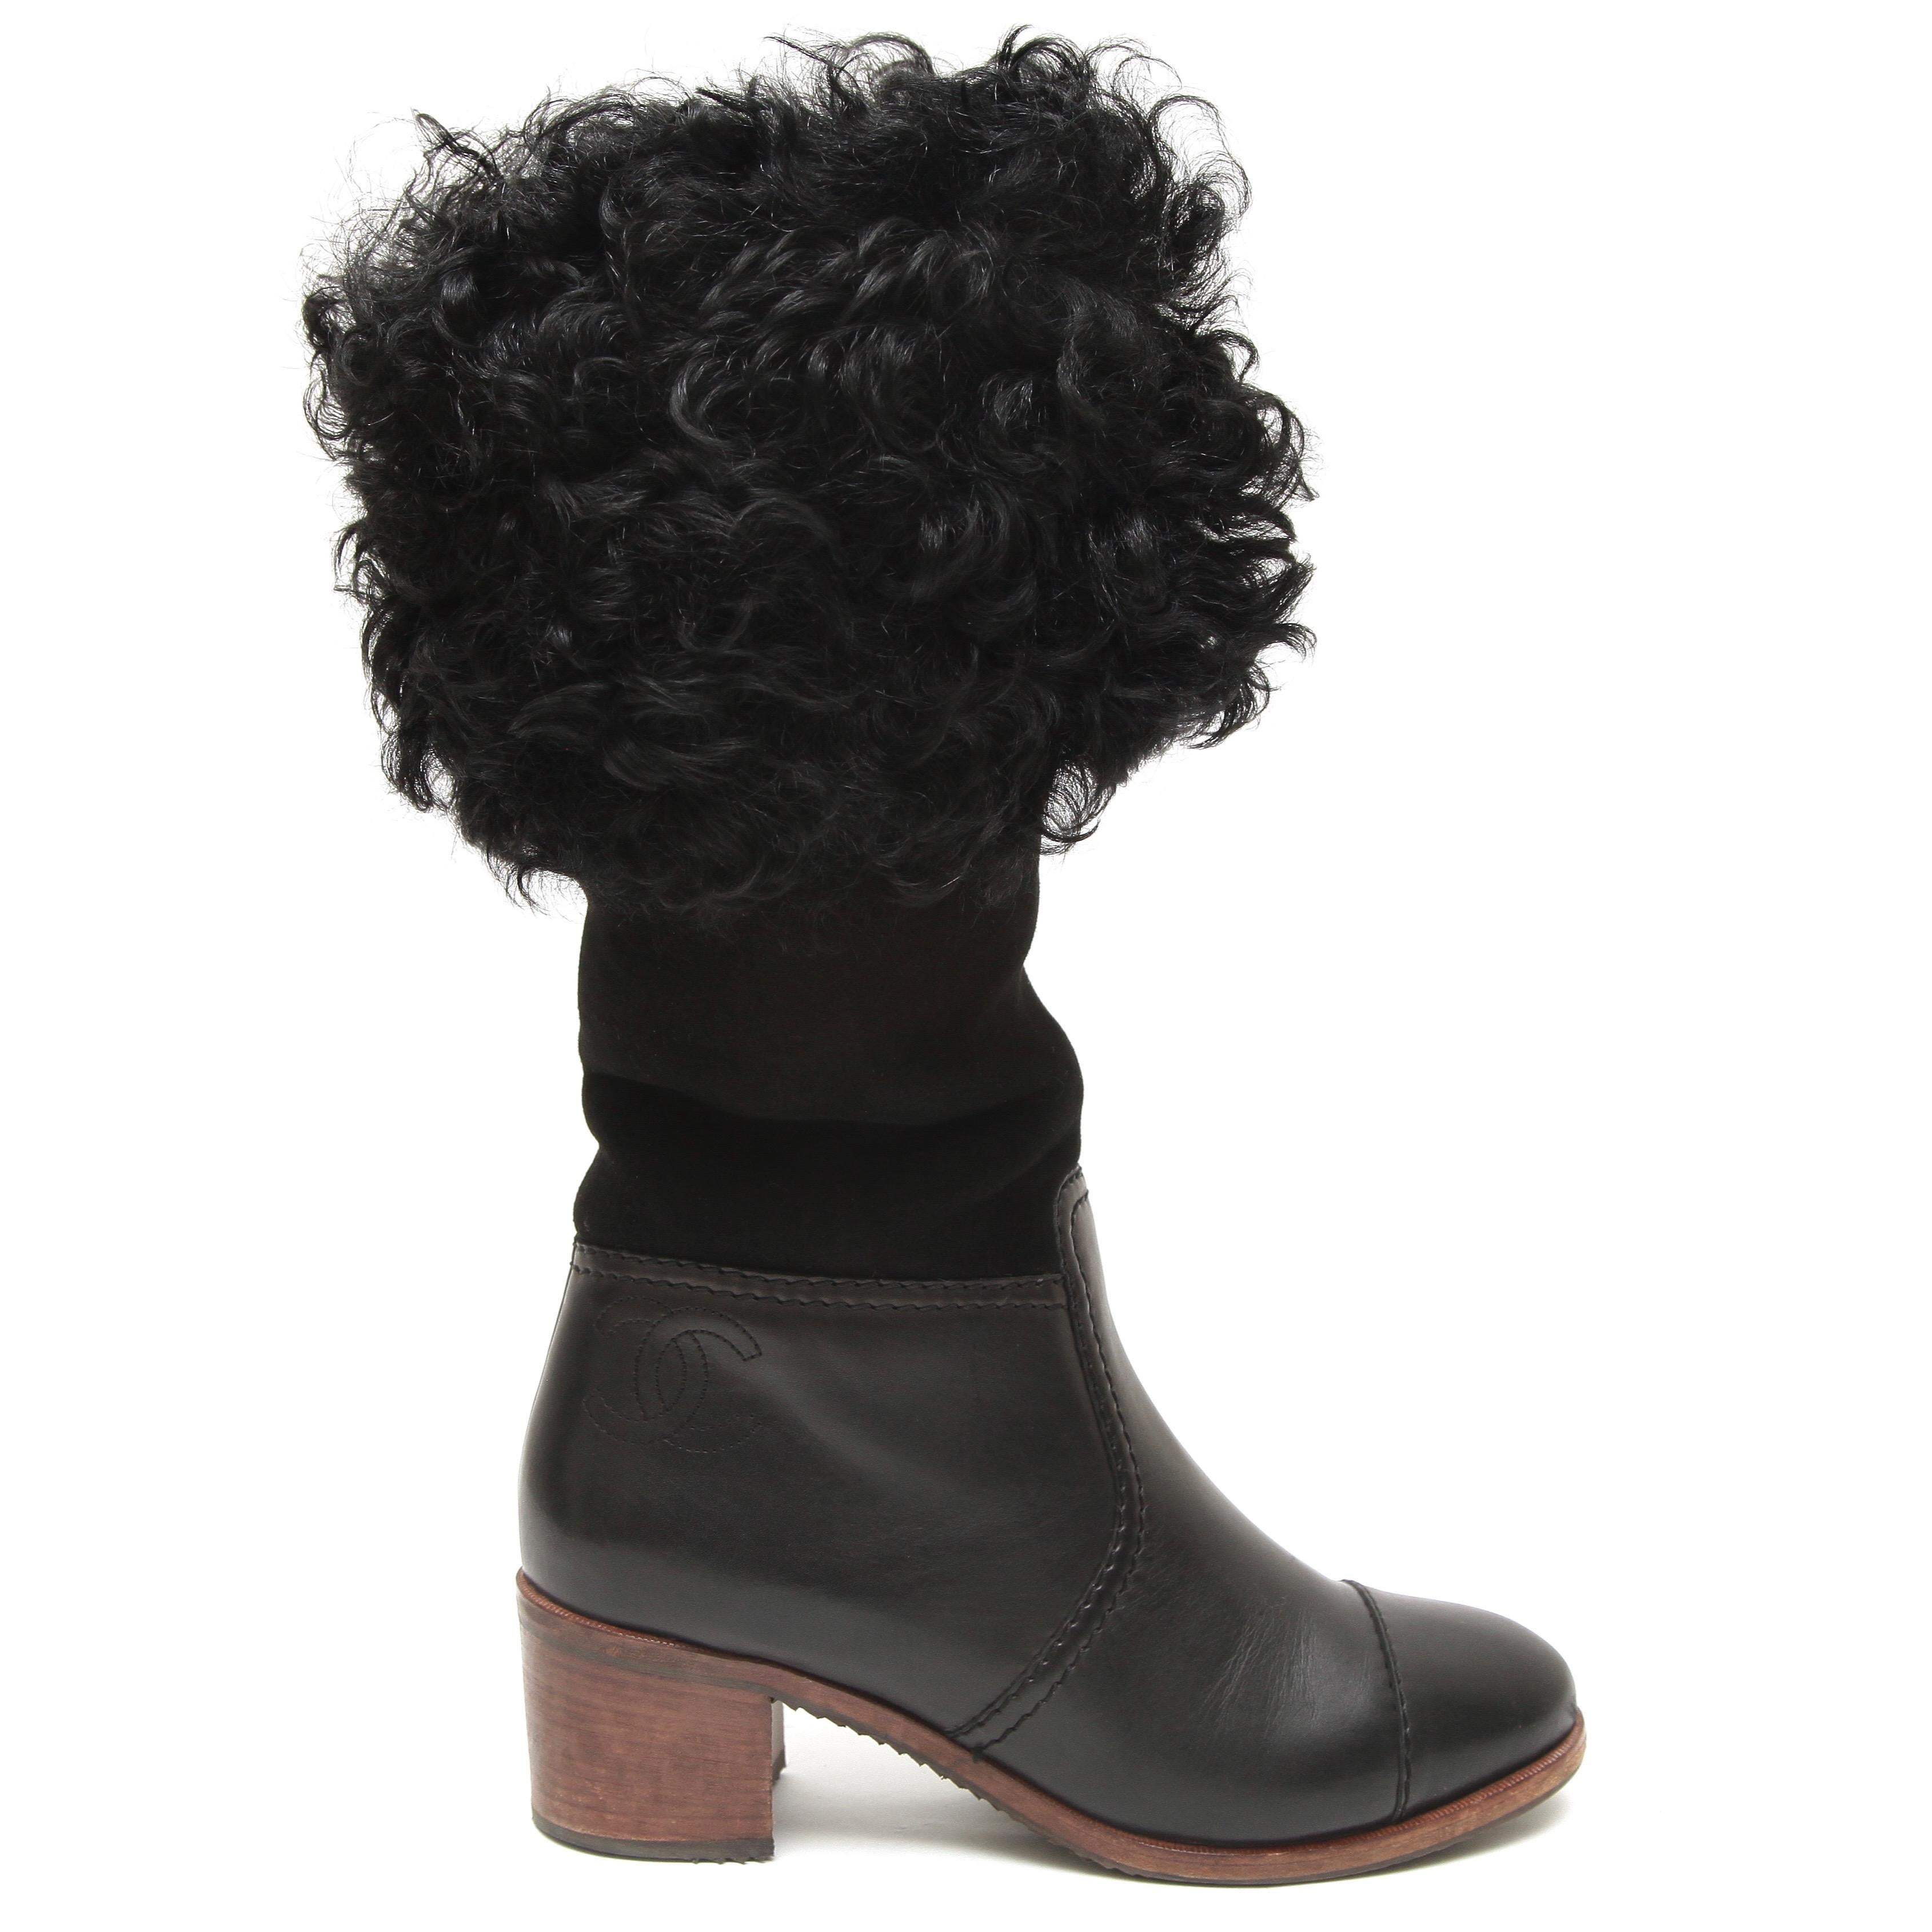 GUARANTEED AUTHENTIC CHANEL 2015 15B BLACK MID-CALF BOOTS

Retailed excluding sales taxes $1,825.

Details:
- Black suede and leather uppers.
- Sheep fur around top of boot.
- Rounded cap toe.
- CC logo at side of boot.
- Block  heels.
- Pull-on.
-